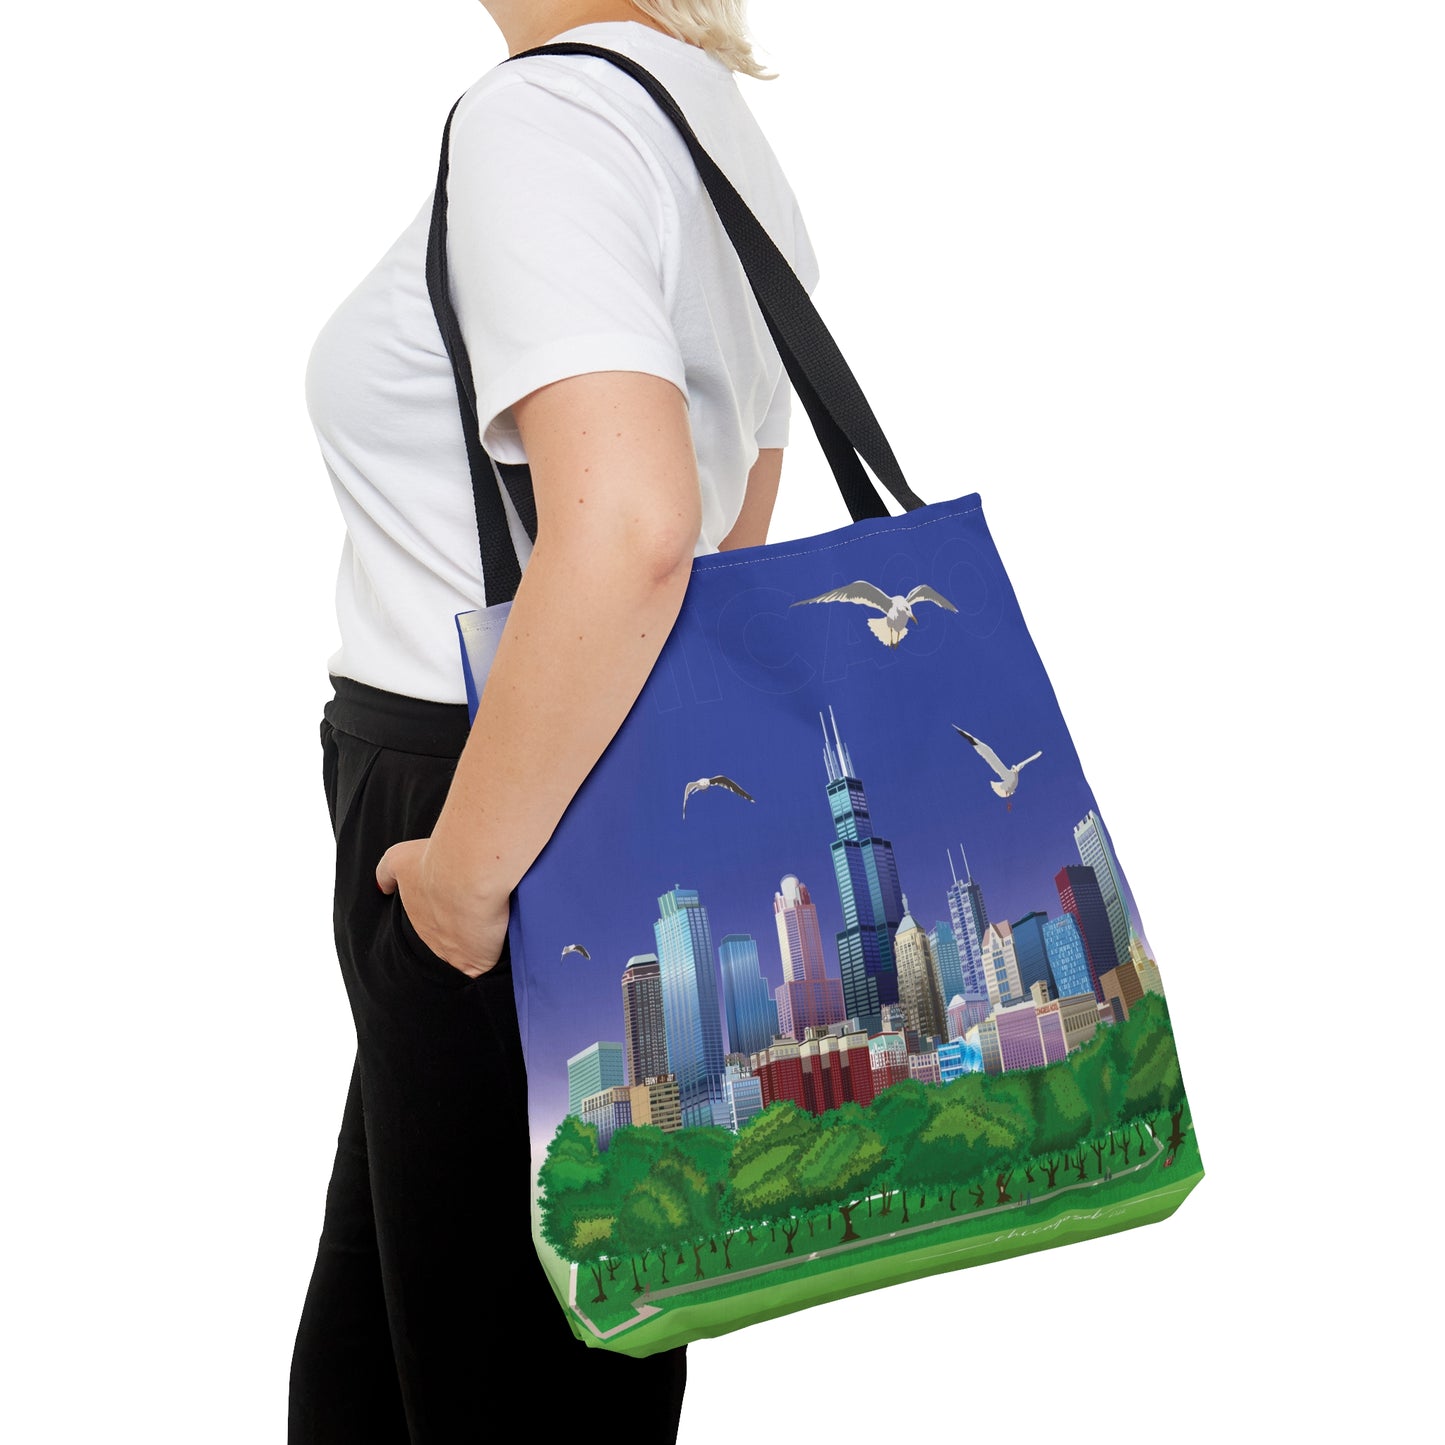 Chicago with Seagulls [Canvas Tote Bag]